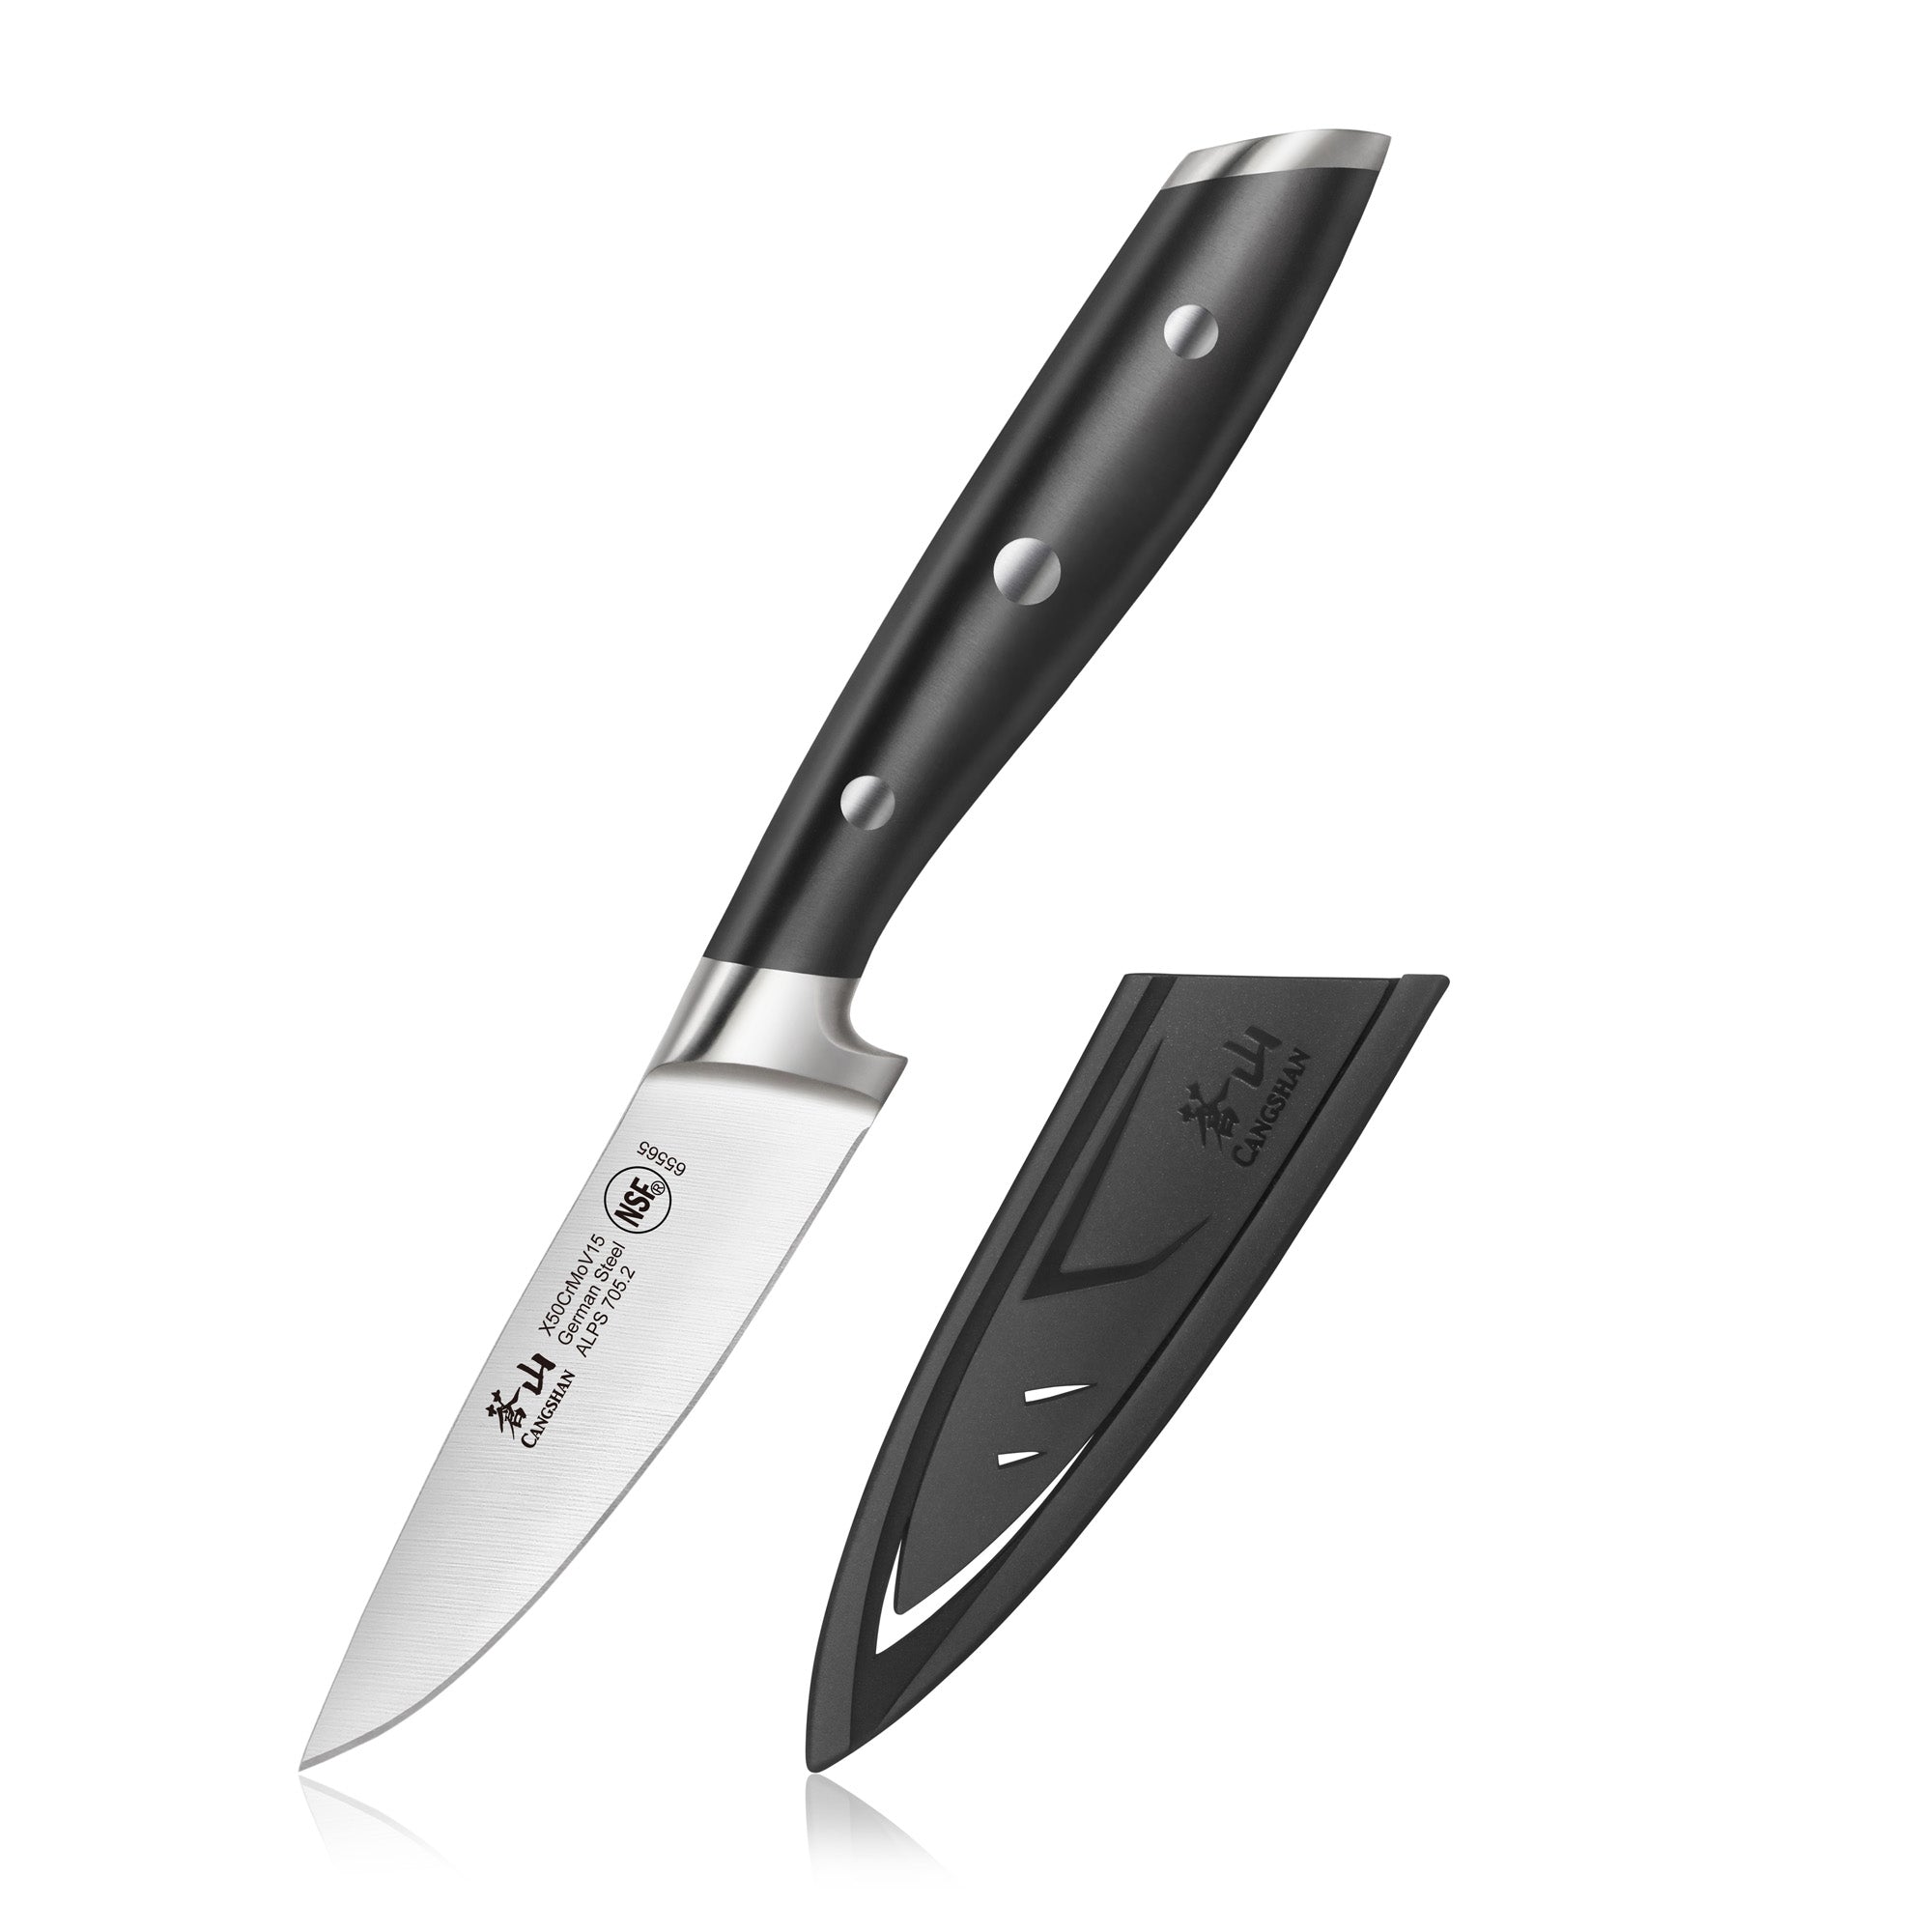 Buy a Premium Paring Knife That Holds Its Edge, Order the CLASSIC 3.5 Paring  Knife at SCANPAN USA